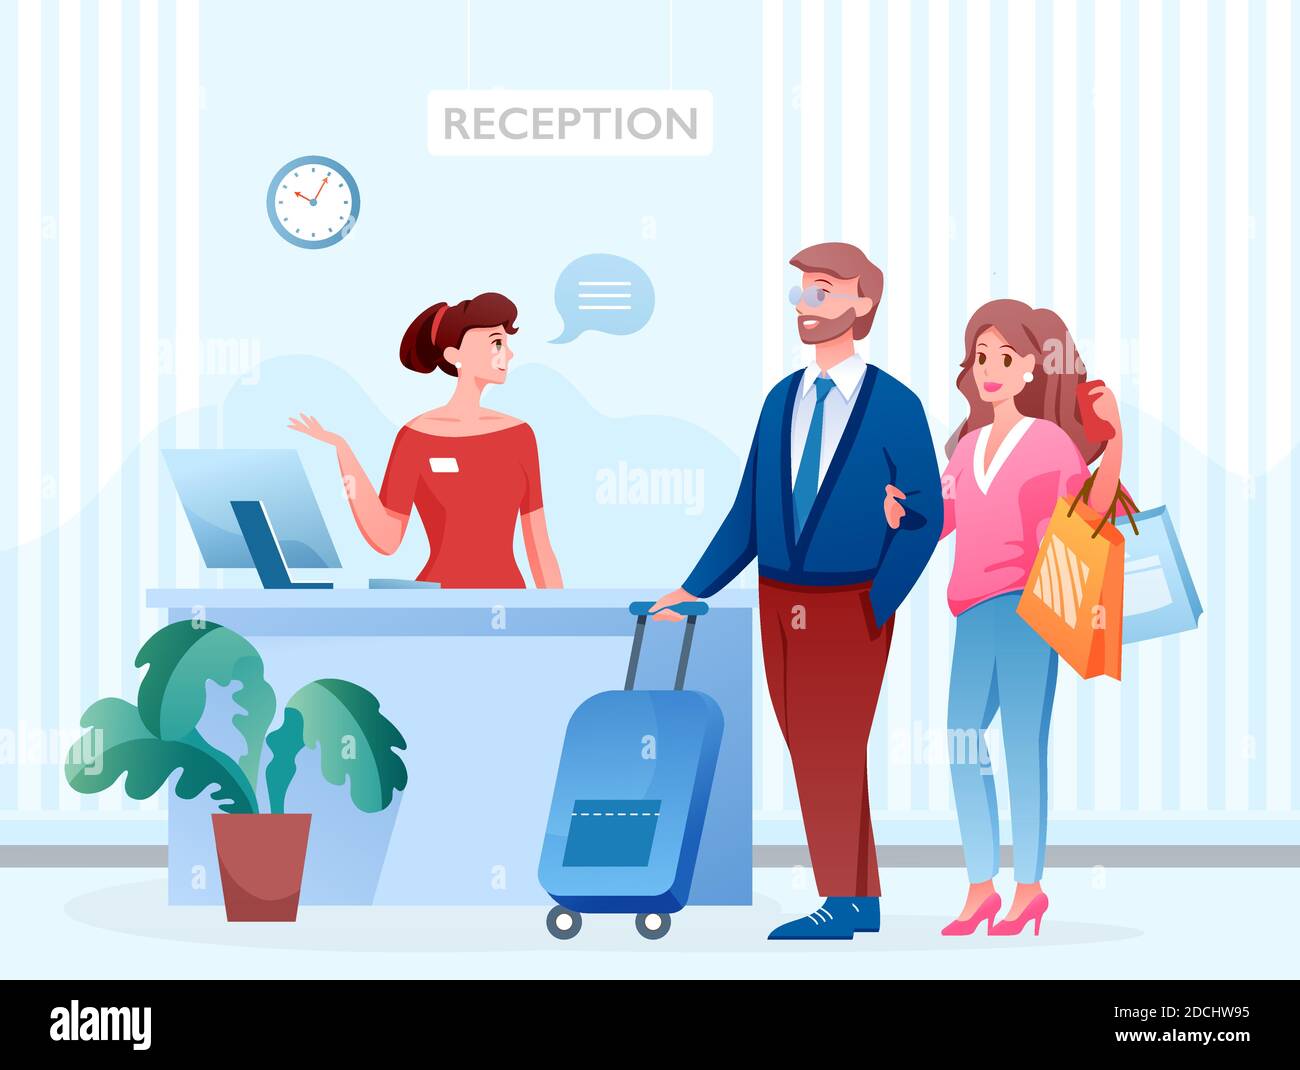 Hotel reception with people, receptionist registration desk Stock Vector